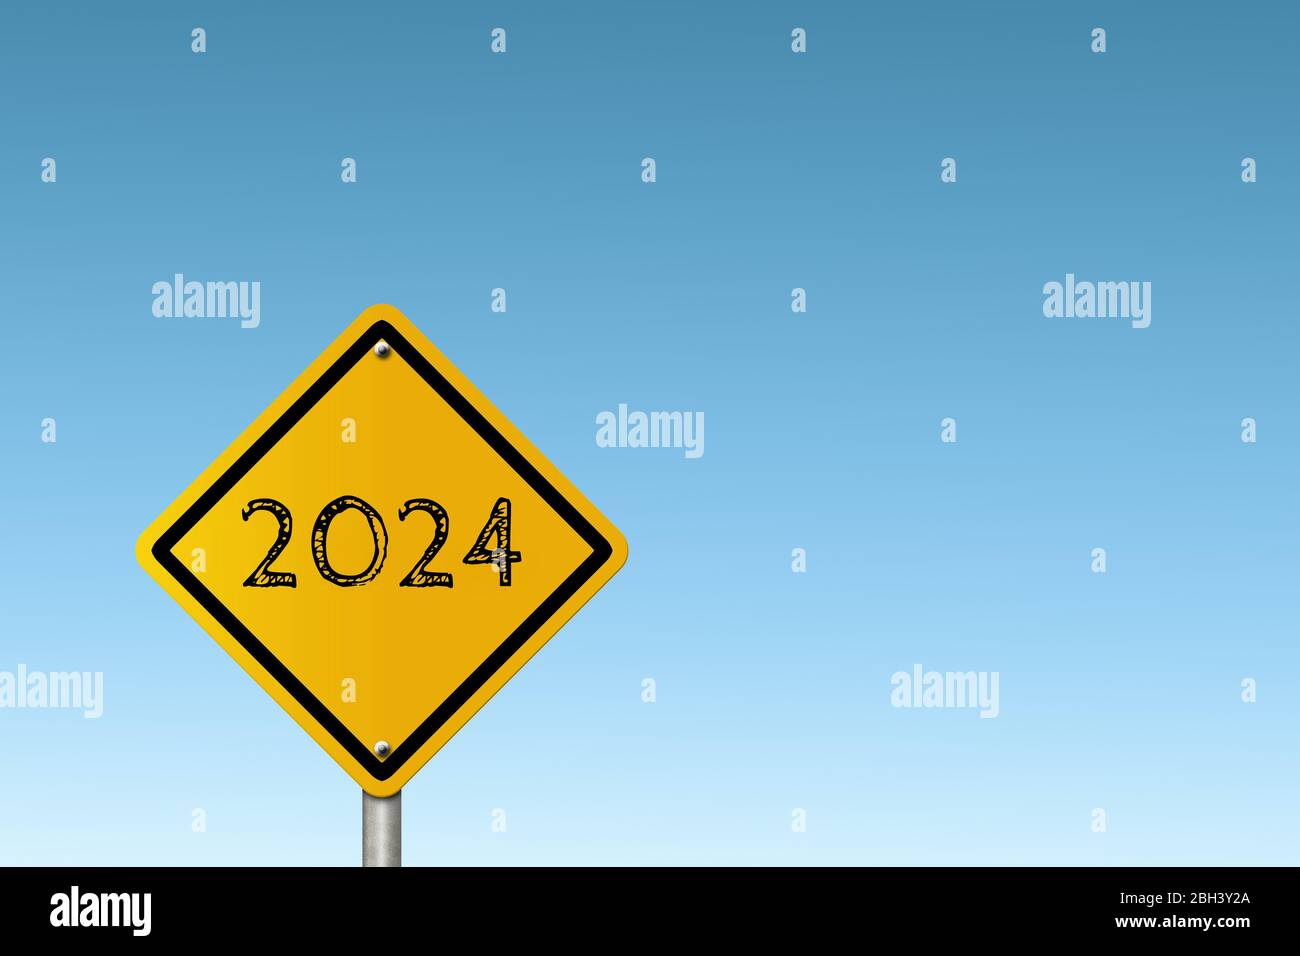 2024 end hires stock photography and images Alamy